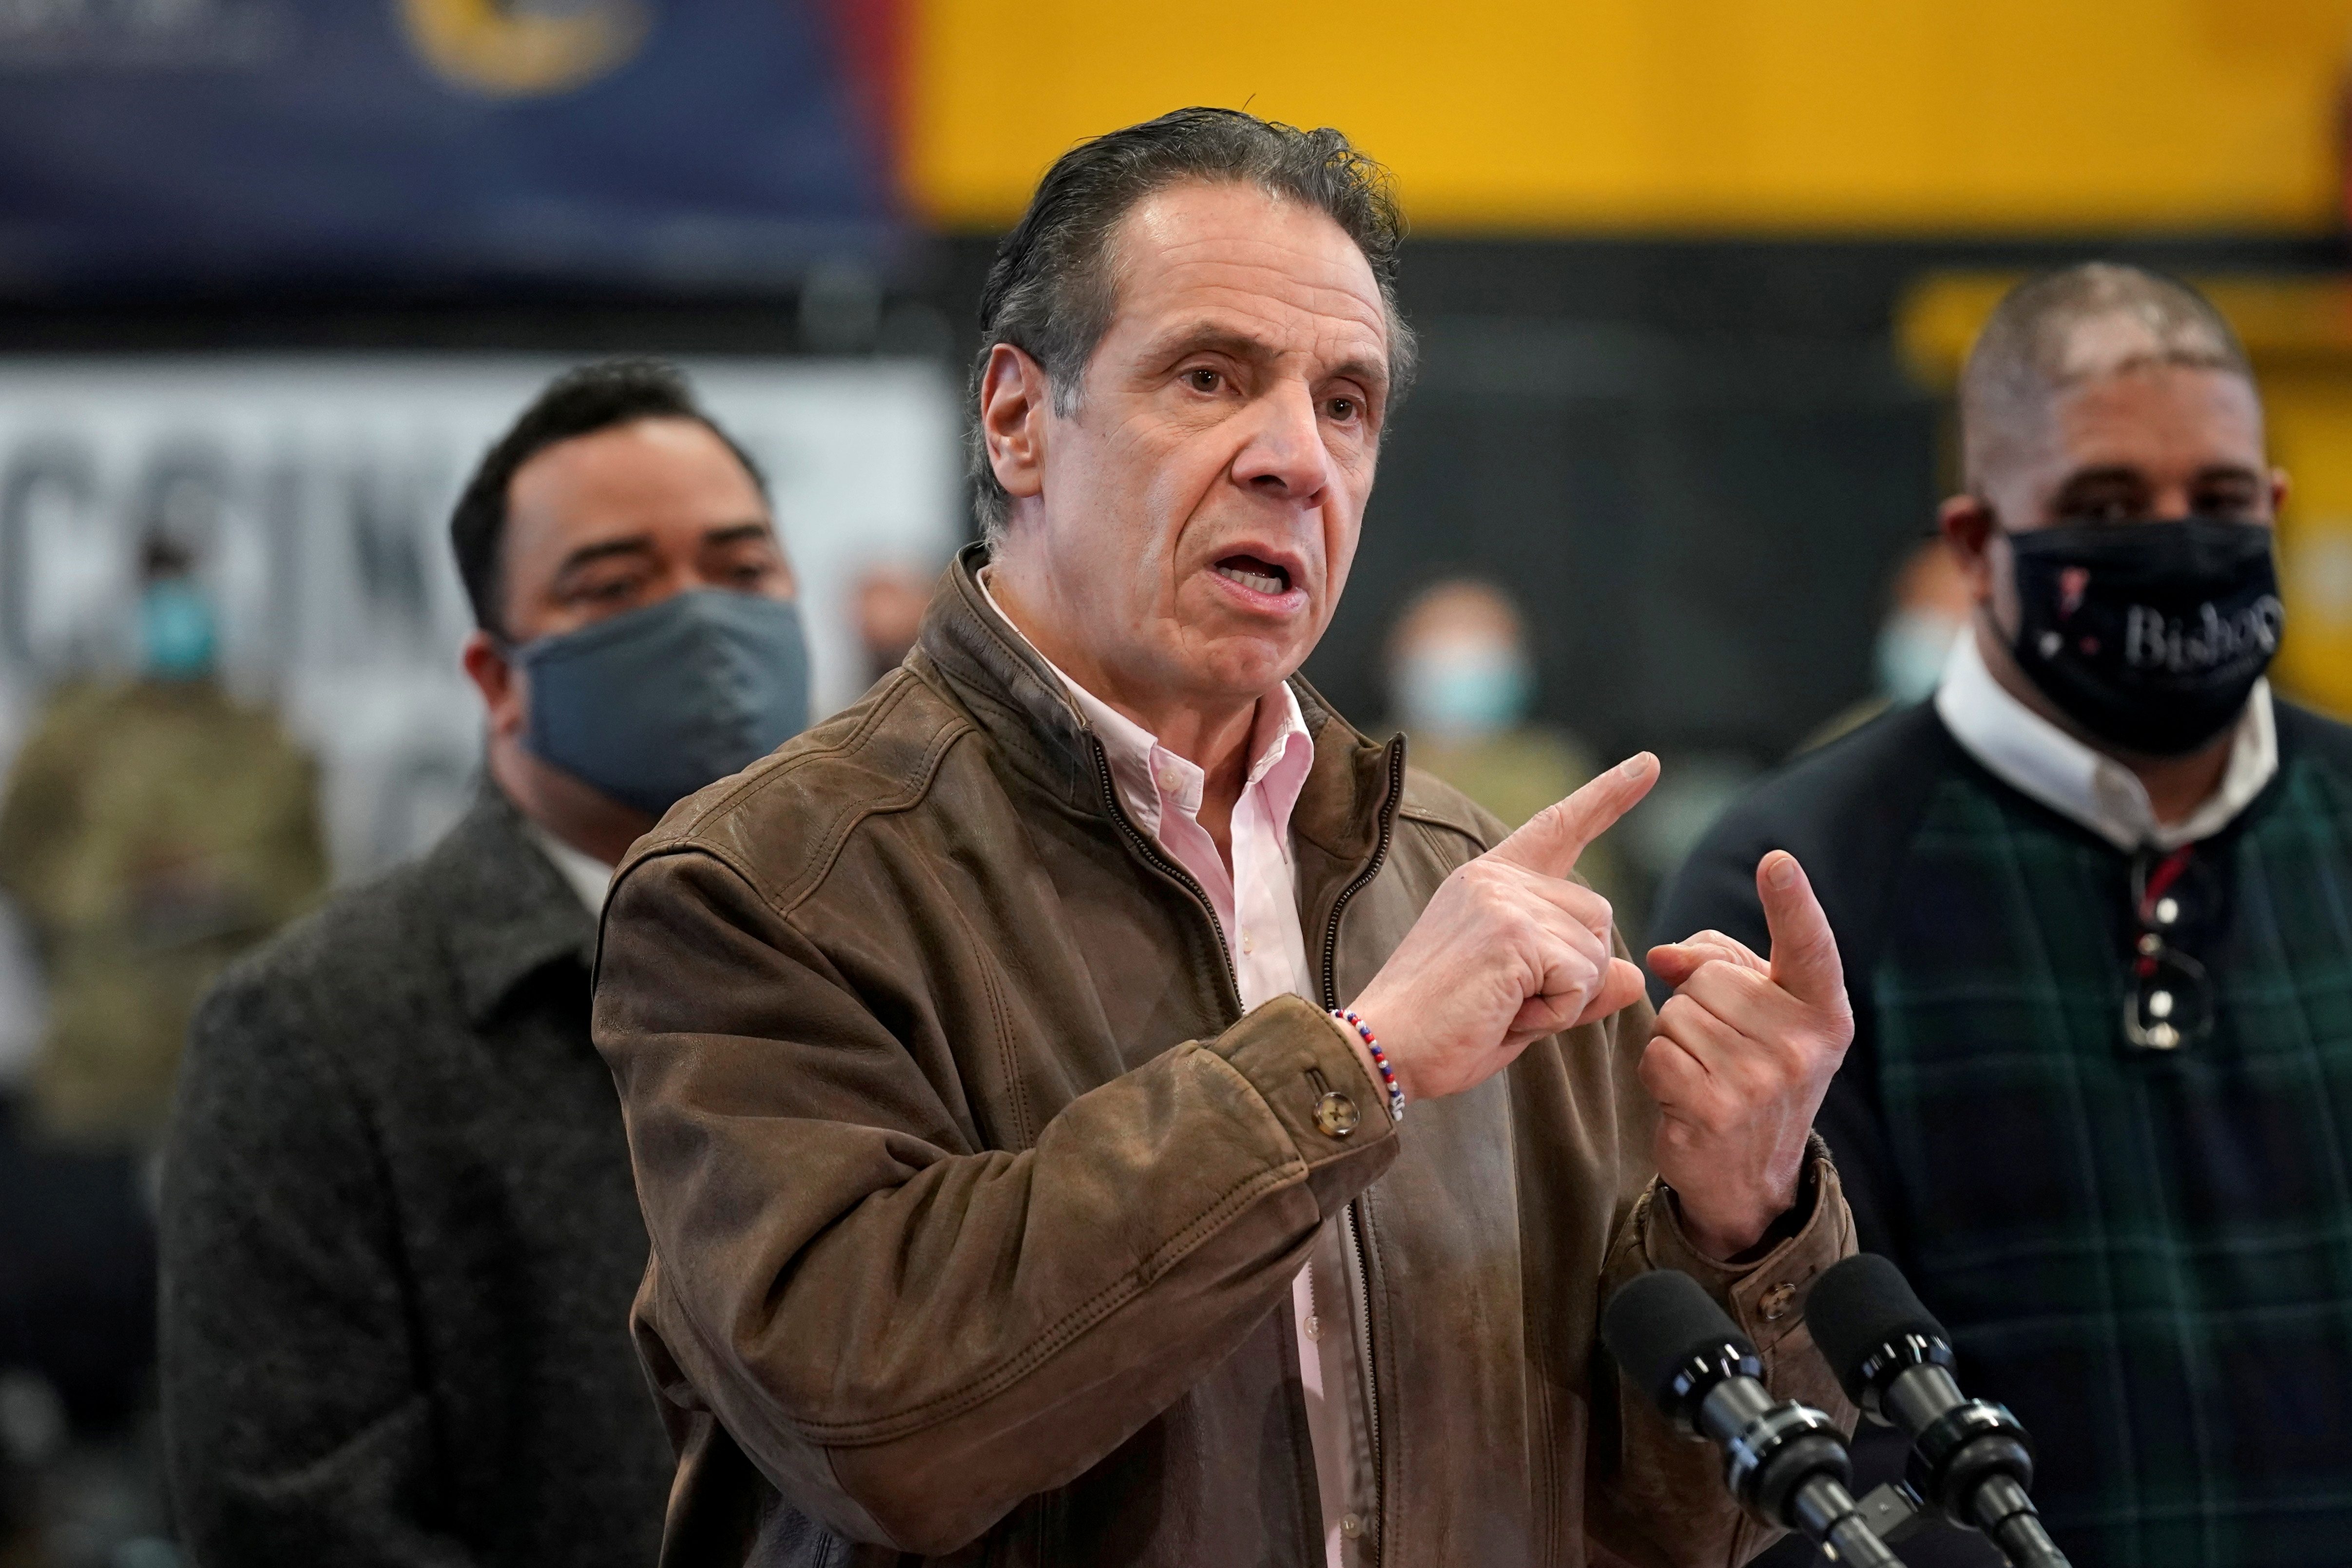 New York’s two senators join mounting calls for Governor Cuomo to resign